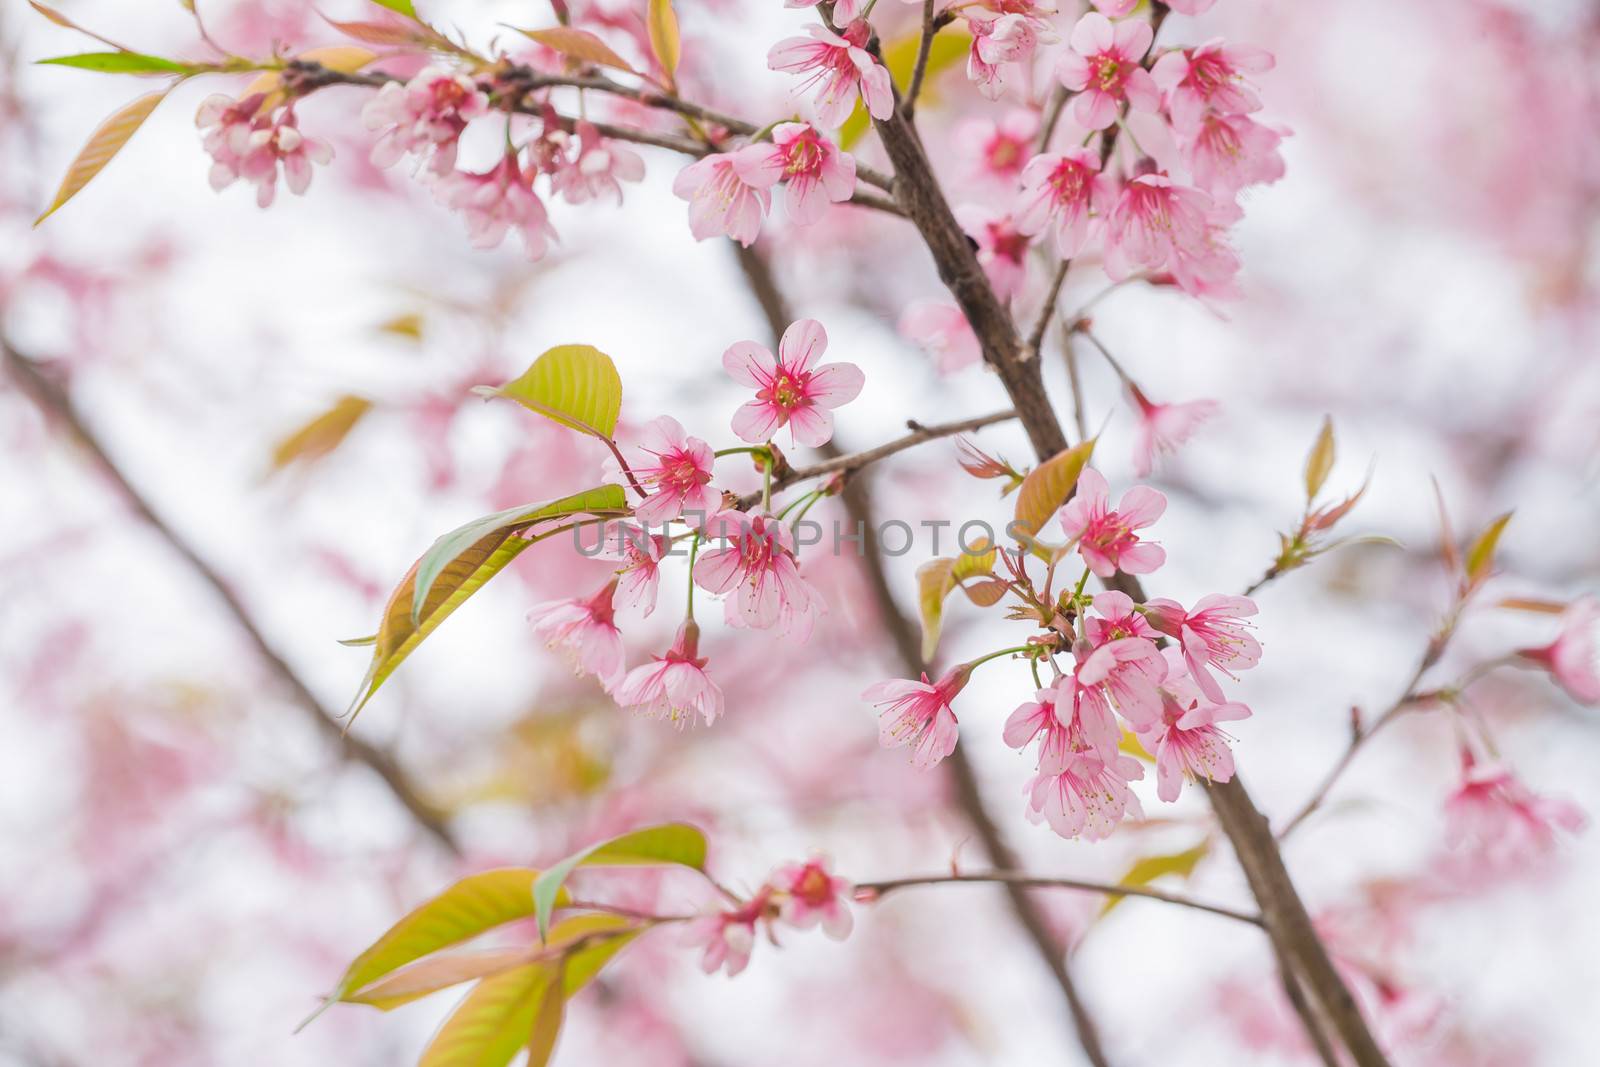 Wild Himalayan Cherry spring blossom, Beautiful pink flower